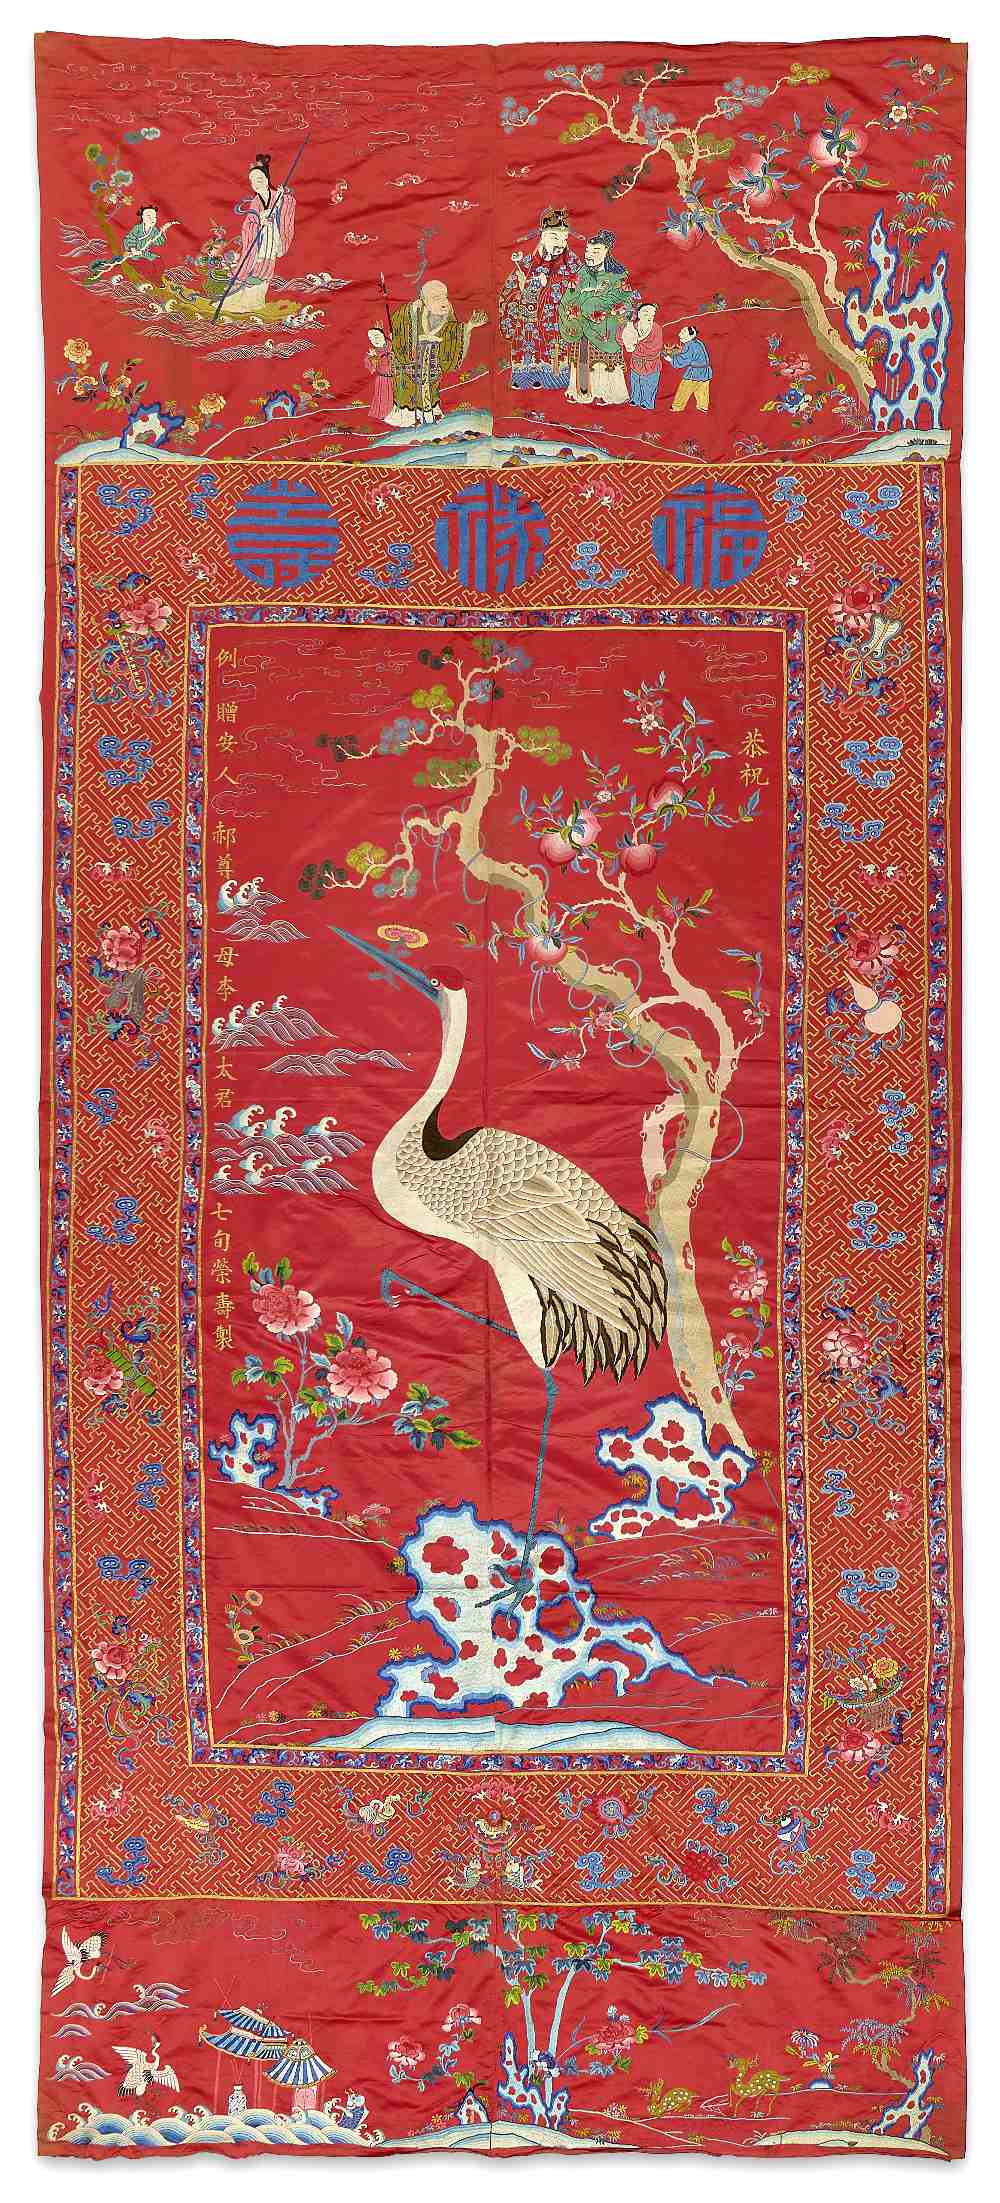 A LARGE CORAL RED-GROUND SILK EMBROIDERED 'LONGEVITY' HANGING 19th century